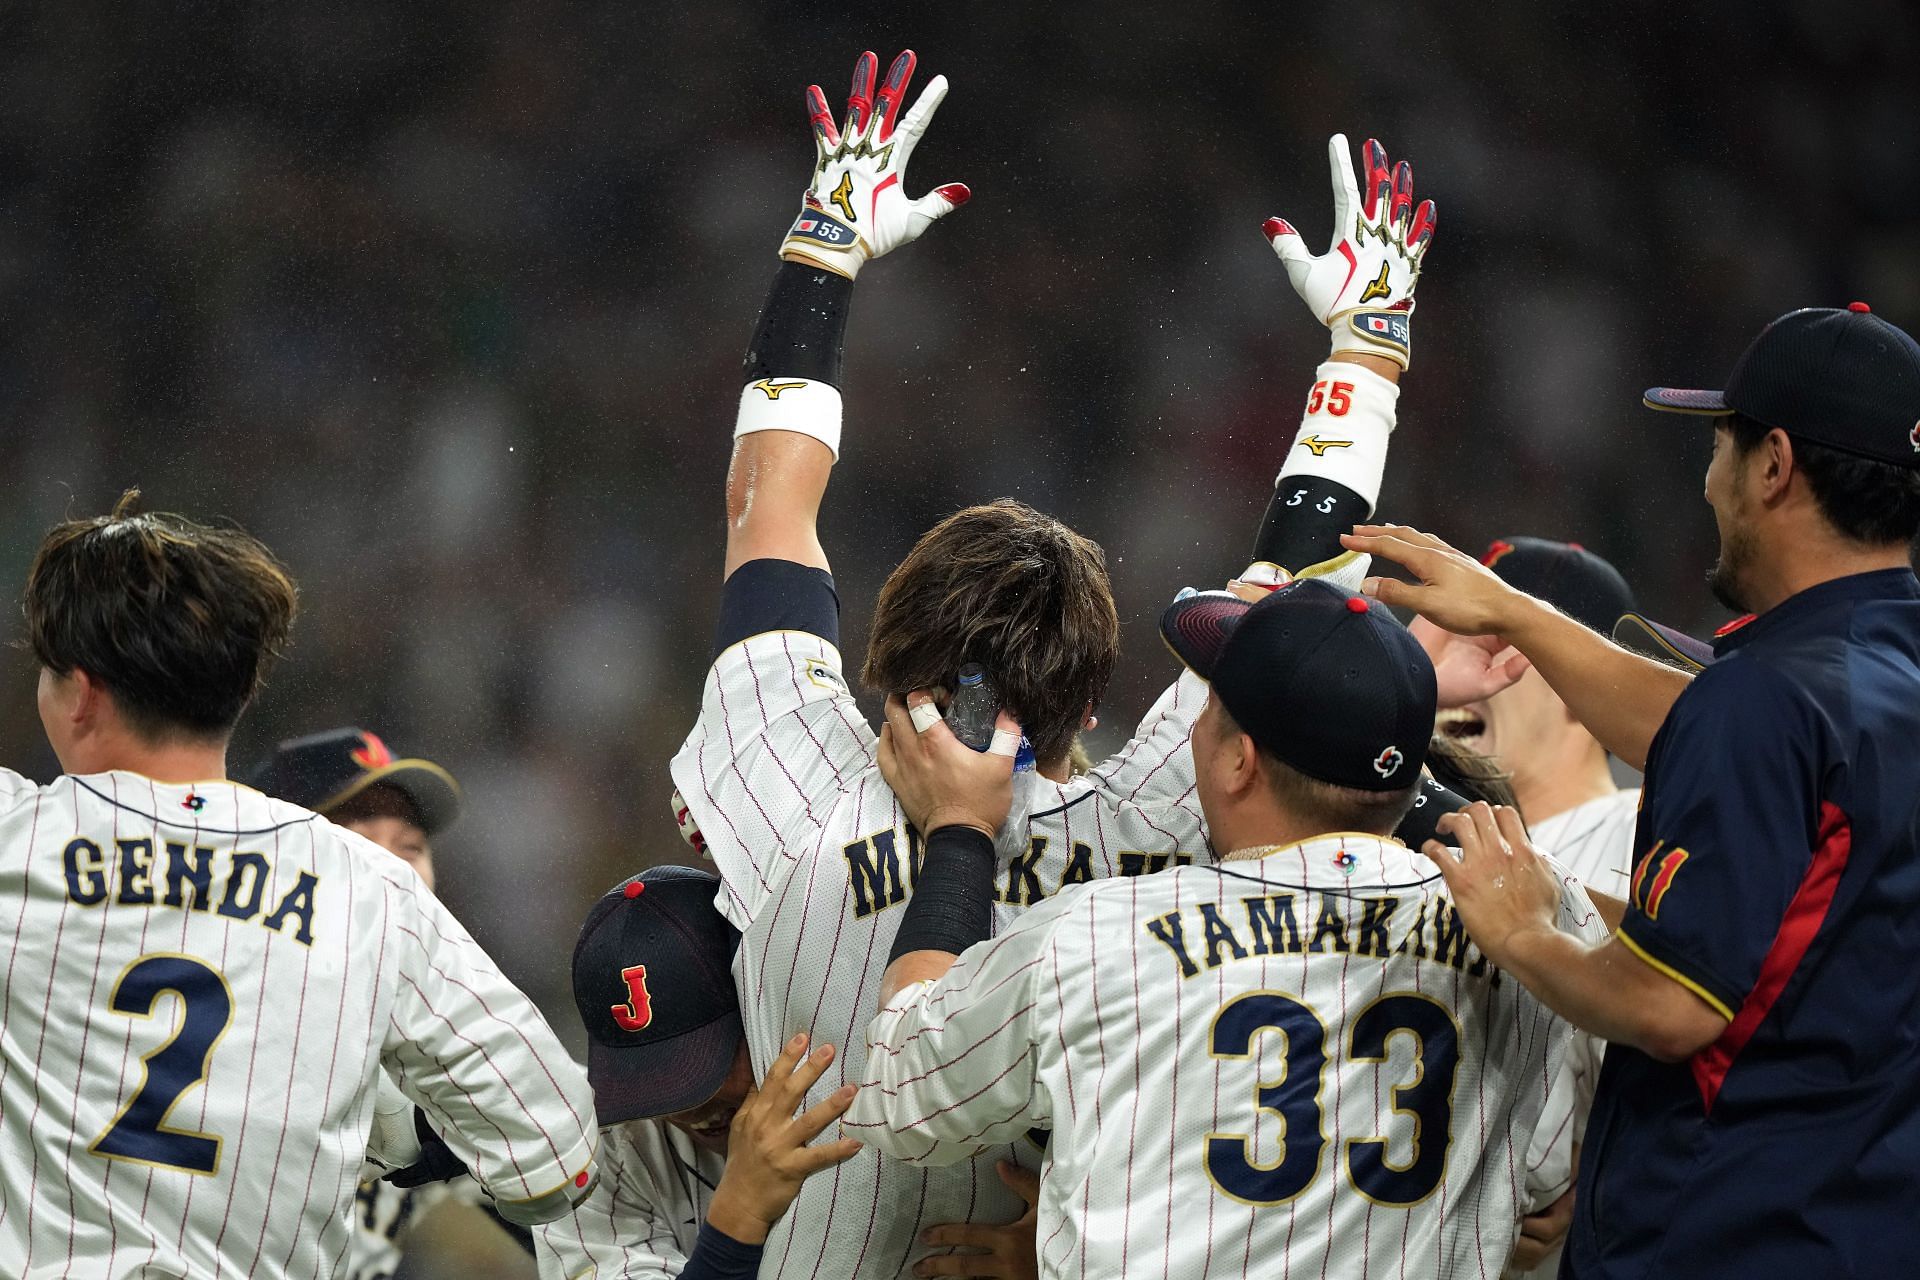 Shohei Ohtani and Japan have advanced to the WBC final after defeating Mexico